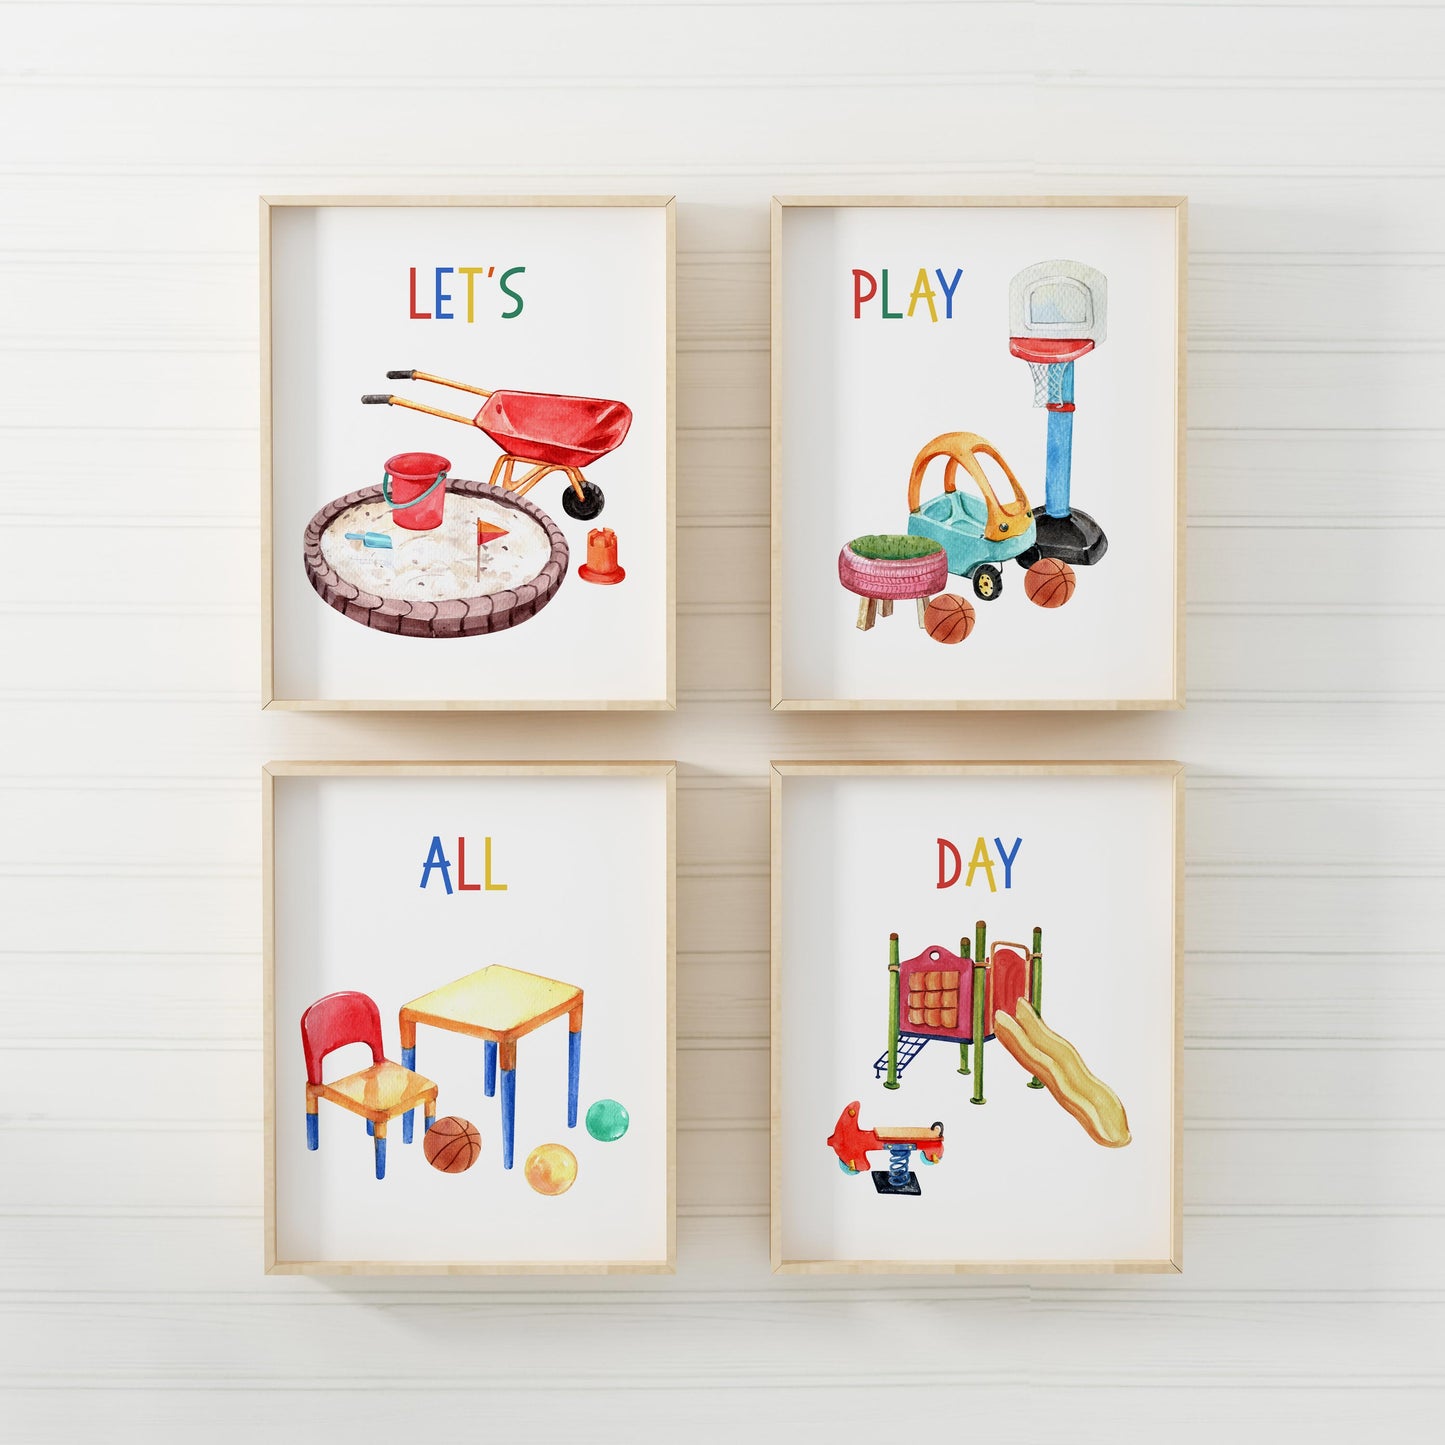 Let's play all day Wall Art, Playroom Nursery Prints Set of 4